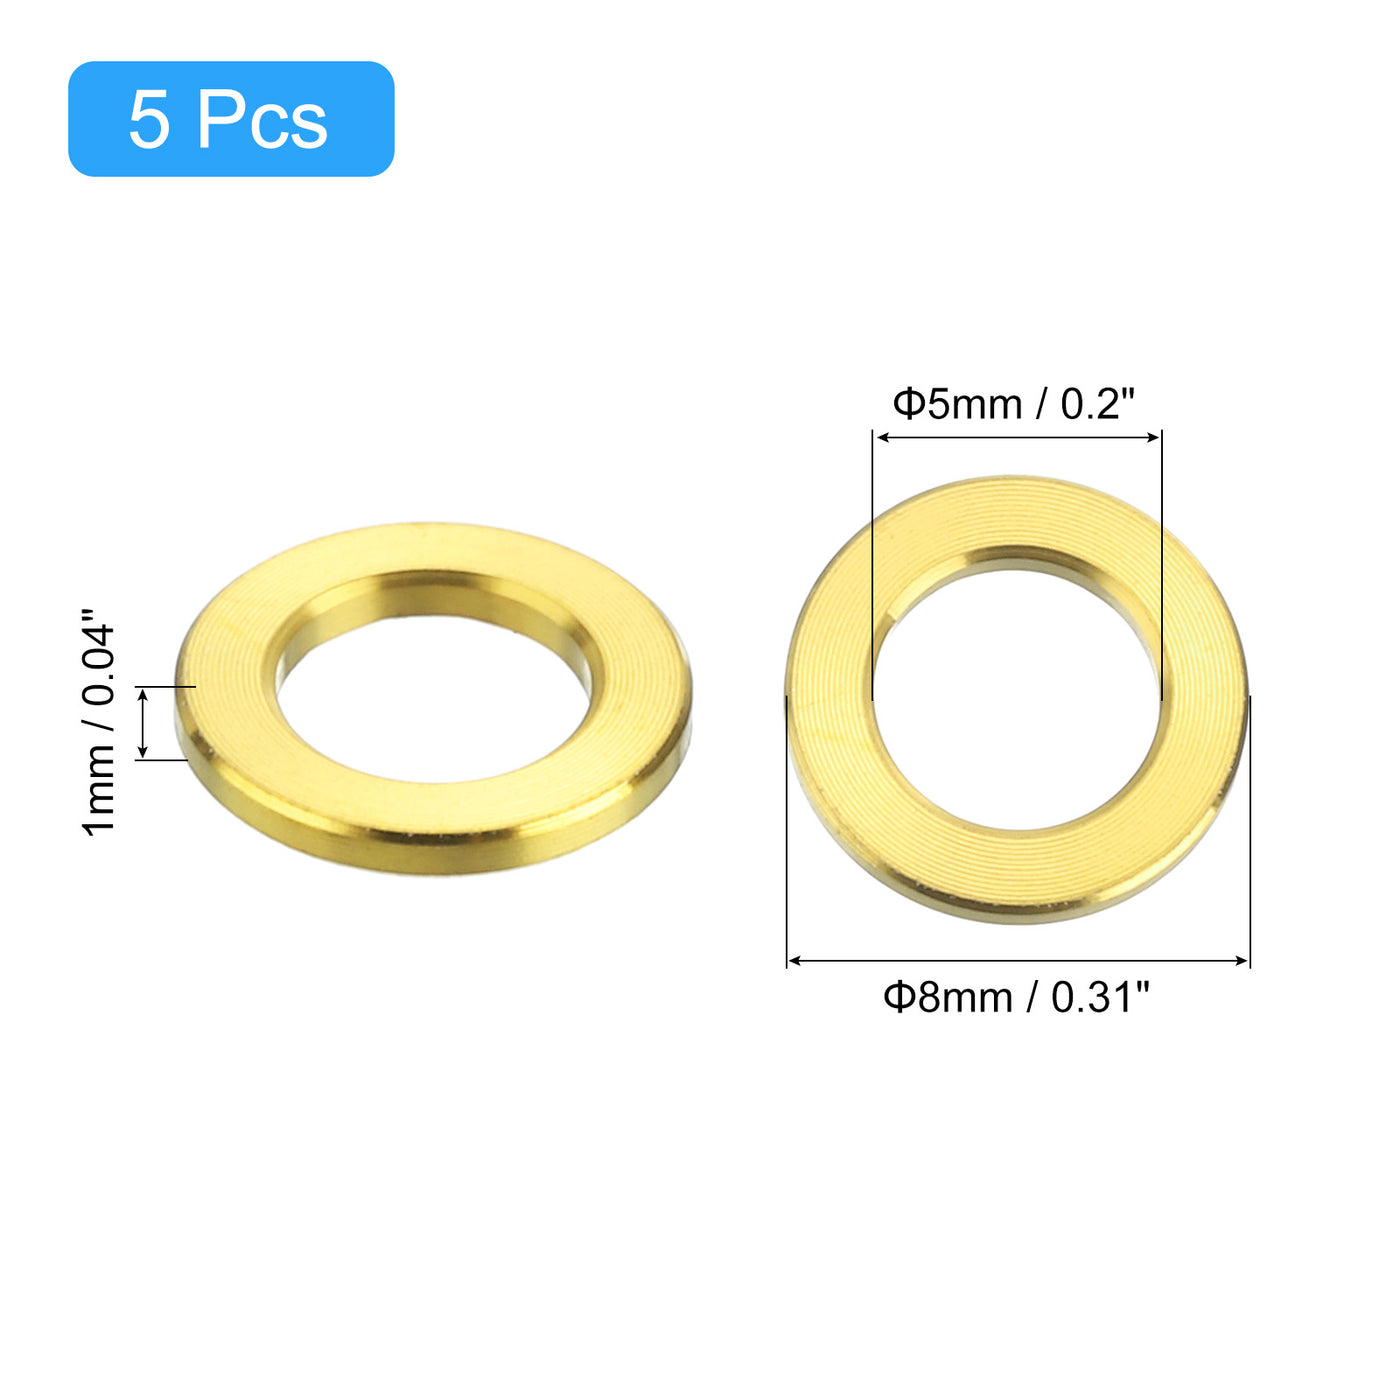 uxcell Uxcell 5 Pcs M5 Titanium Flat Washer Metric Flat Washer Gold